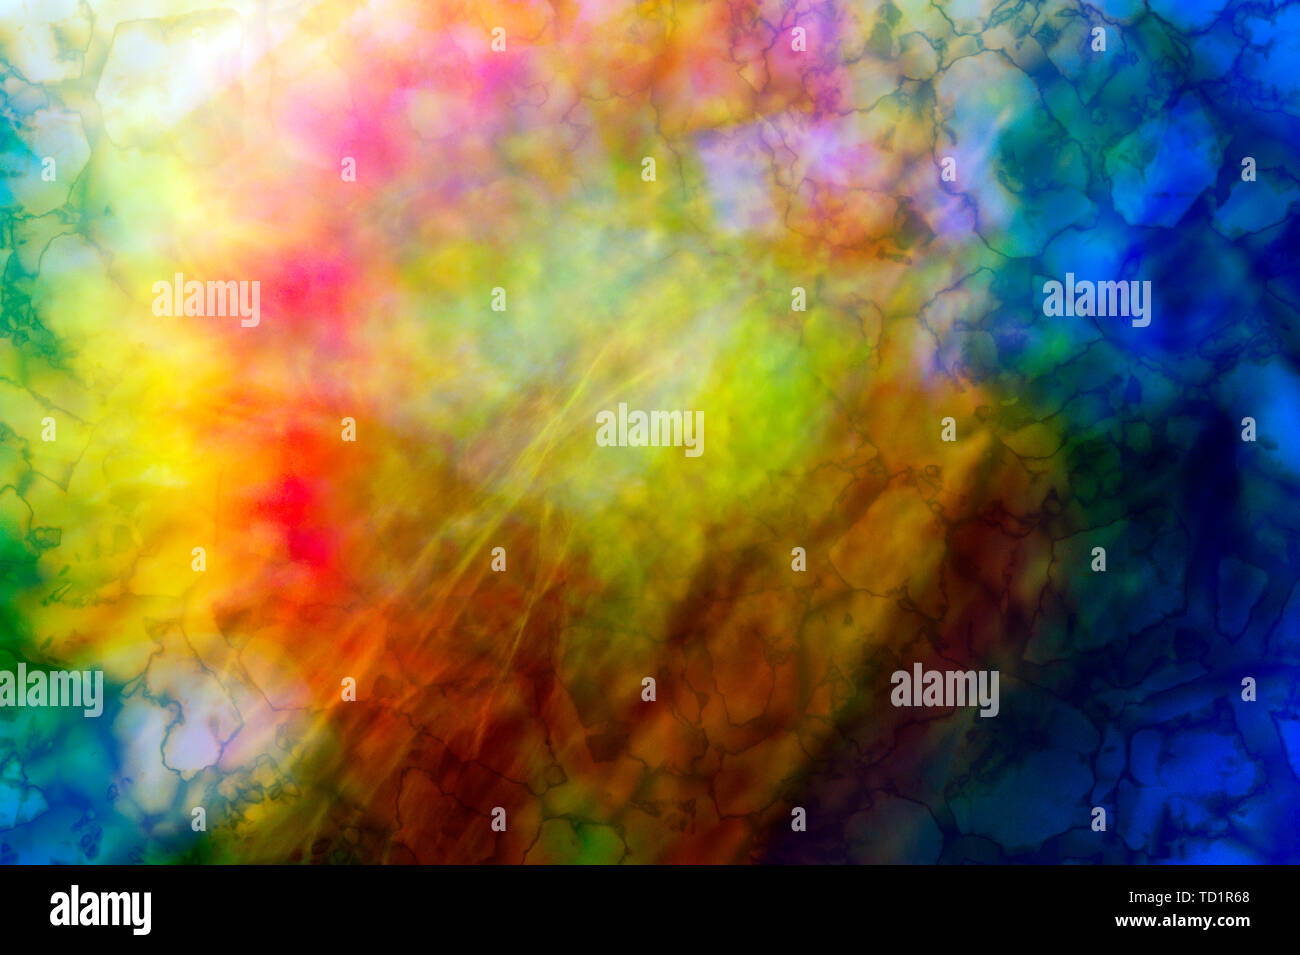 colorful ethereal abstract background Stock Photo